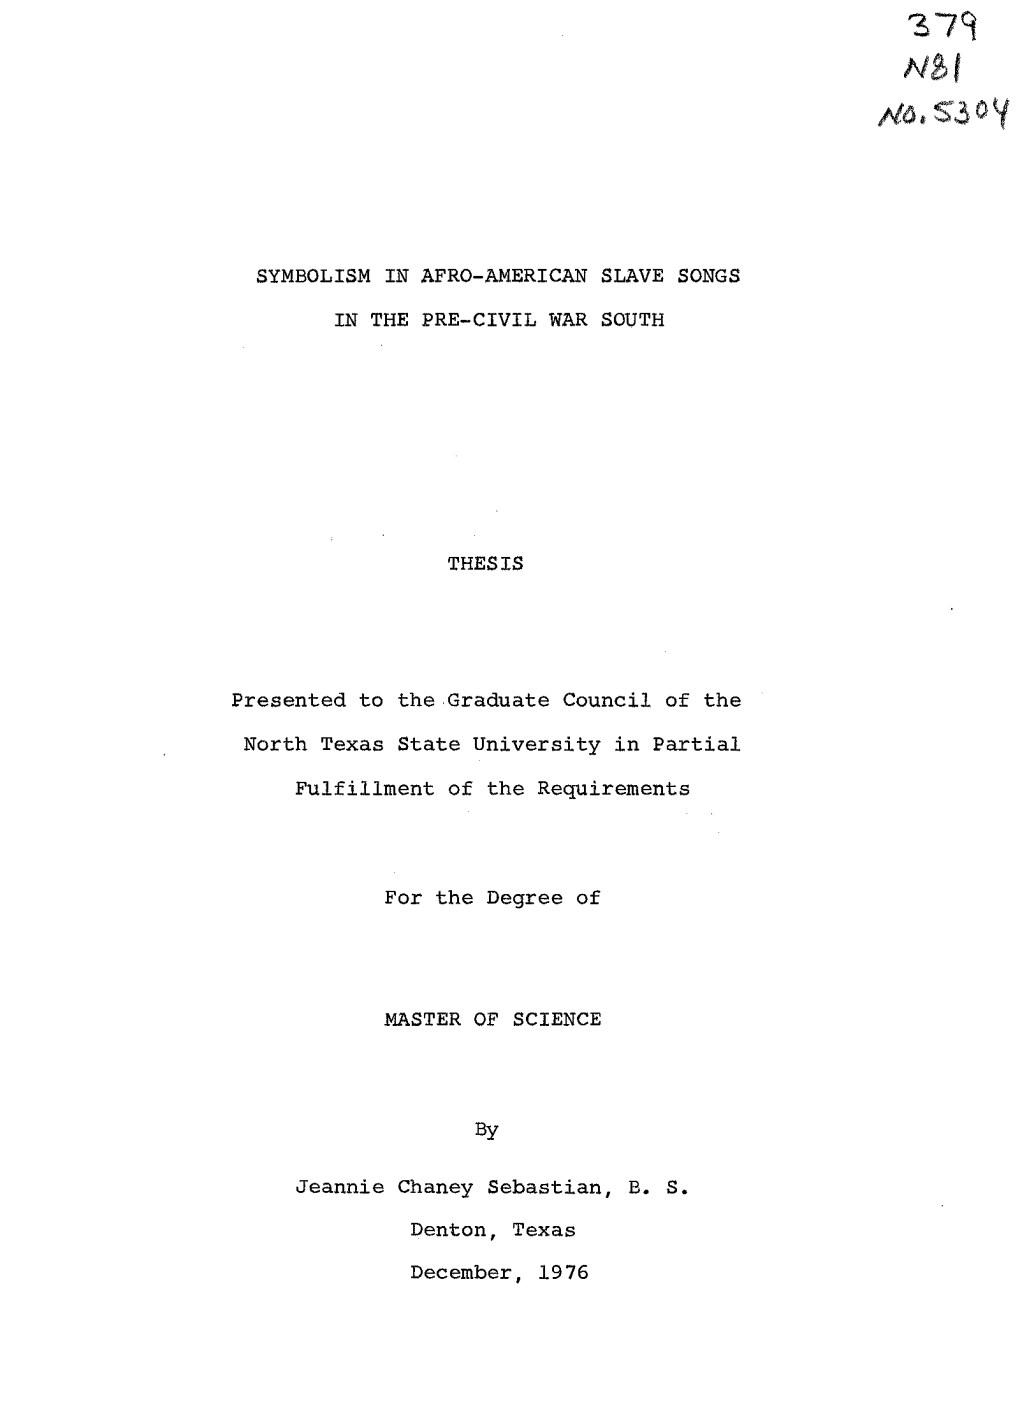 SYMBOLISM in AFRO-AMERICAN SLAVE SONGS THESIS Presented